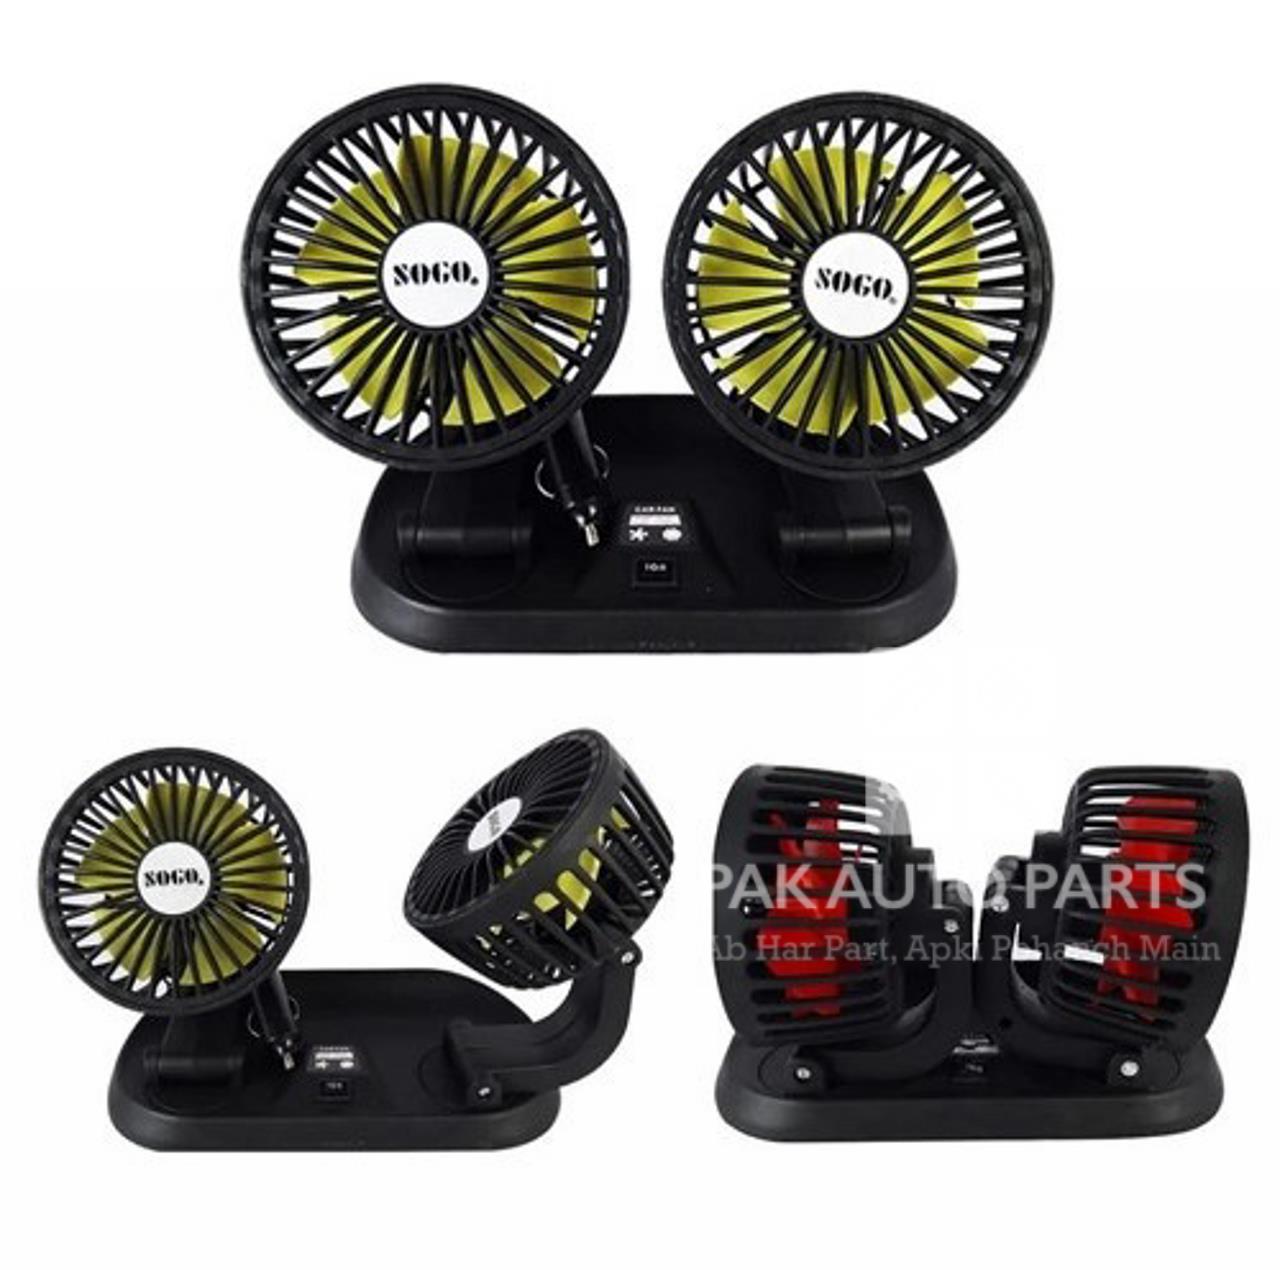 Picture of SOGO New Model Car Dashboard Long Head Dual Fans 360 Degree Rotation 12V